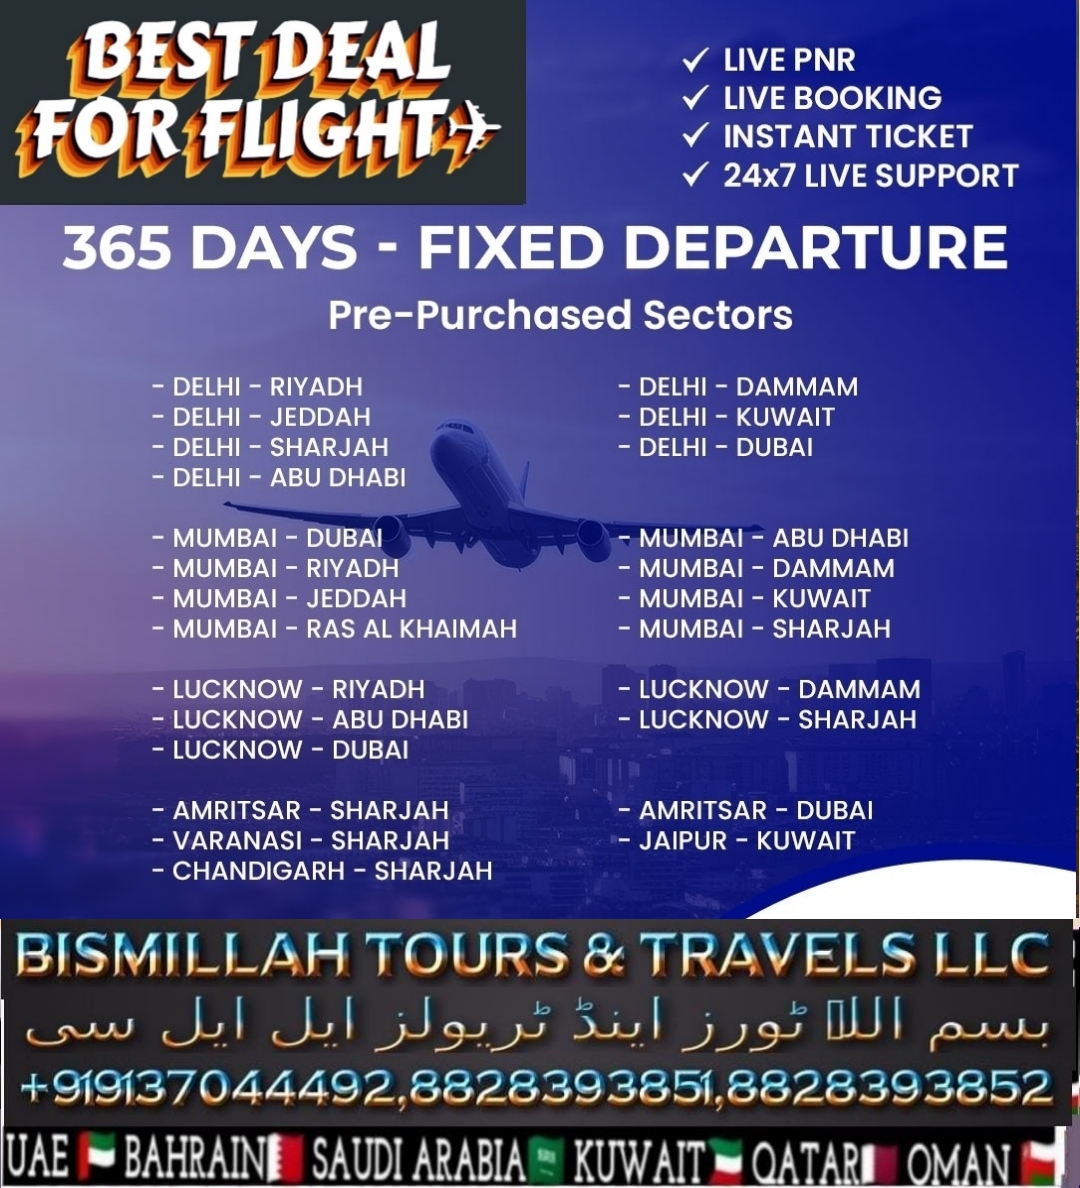 GULF COUNTRY AIR TICKET BEST DEAL